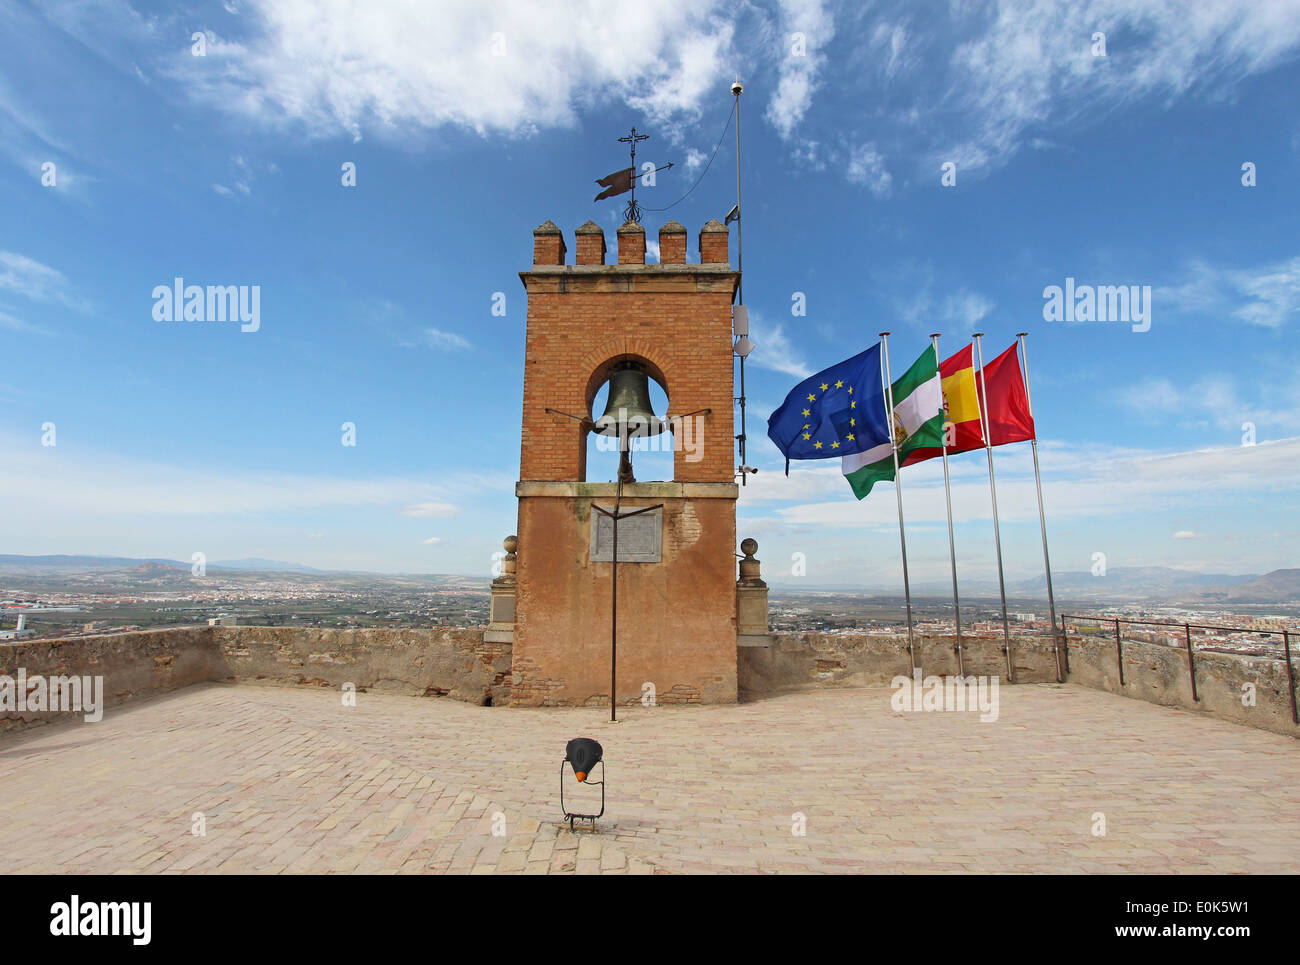 Flags and a crenelated bell tower at the highest point of the Alcazaba fortress of the Alhambra in Granada, Spain Stock Photo